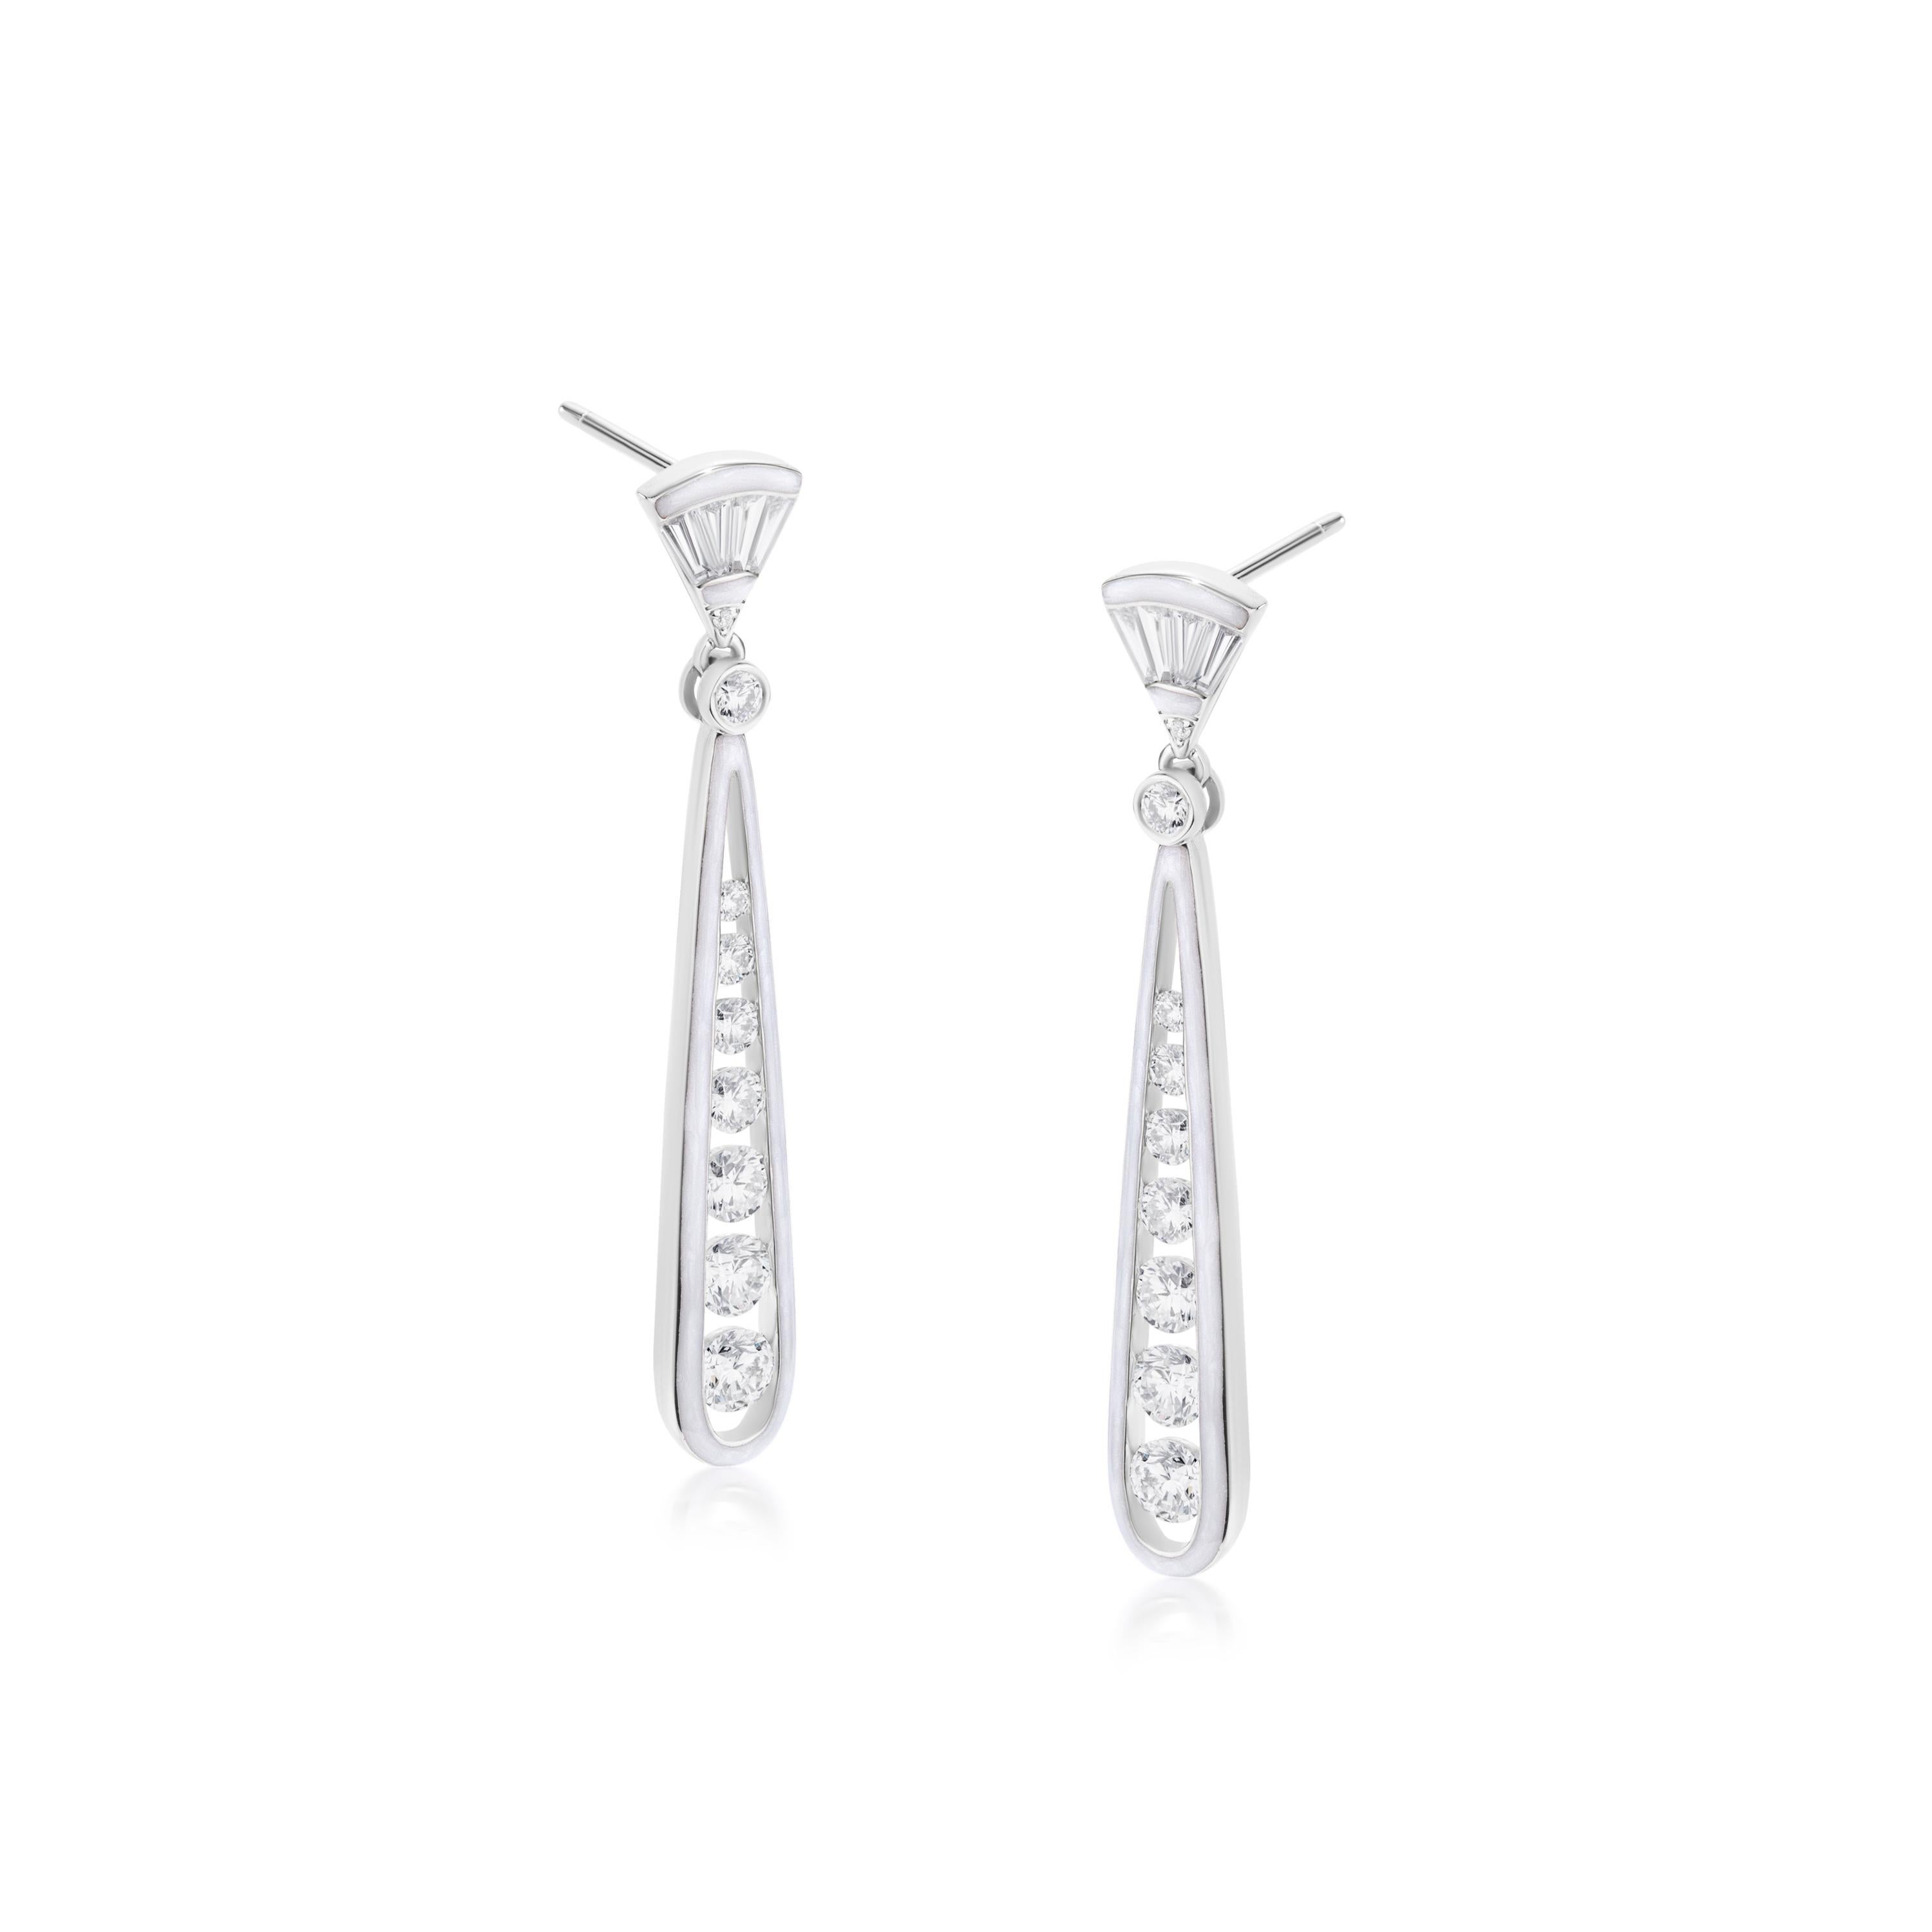 This elongated earring in a drop style is a perfect gift for yourself on your birthday. This stunning pair is crafted on an 18K White Gold body, made by Luxle with round and baguette full-cut white diamonds in tension, bezel, and bar setting. The